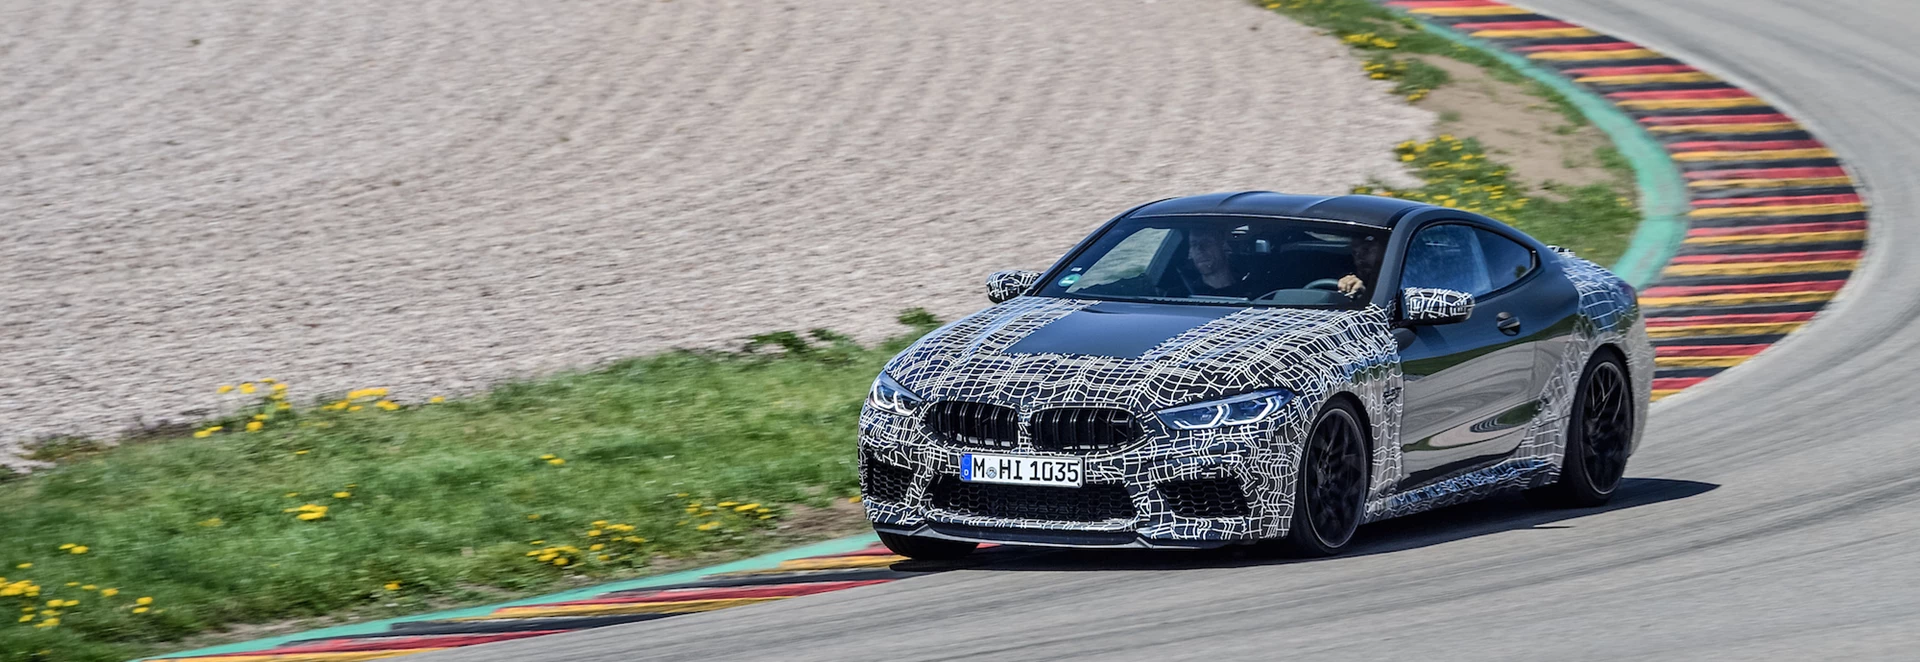 Hot BMW M8 set to be unveiled in September 